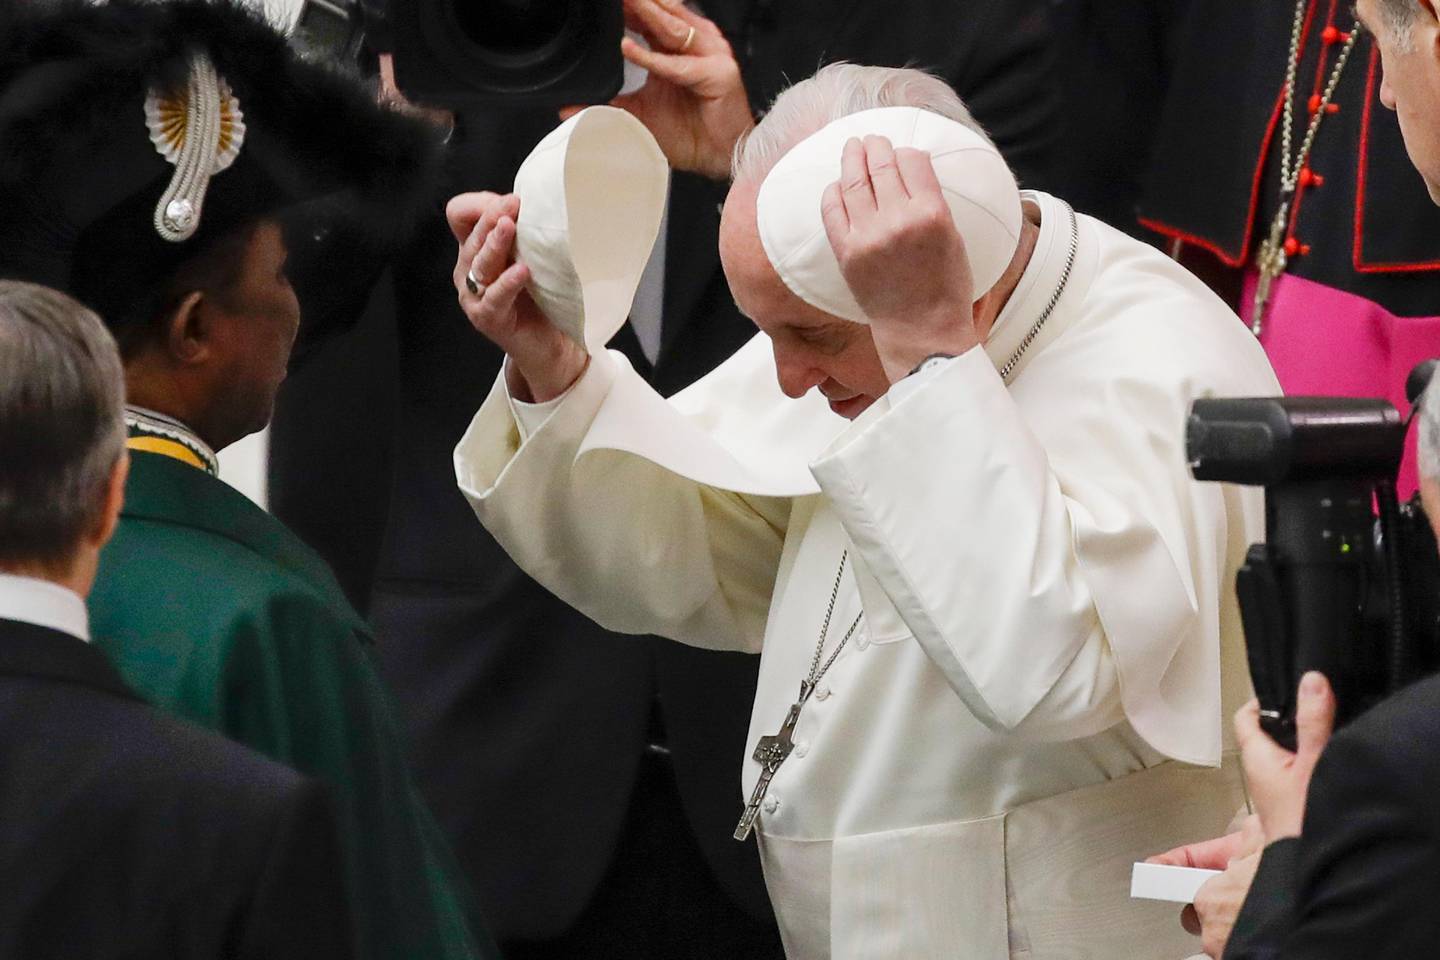 Pope Francis tries on a cap he was offere during his weekly general audience, in Paul VI Hall at the Vatican, Wednesday, Jan. 15, 2020. (AP Photo/Alessandra Tarantino)